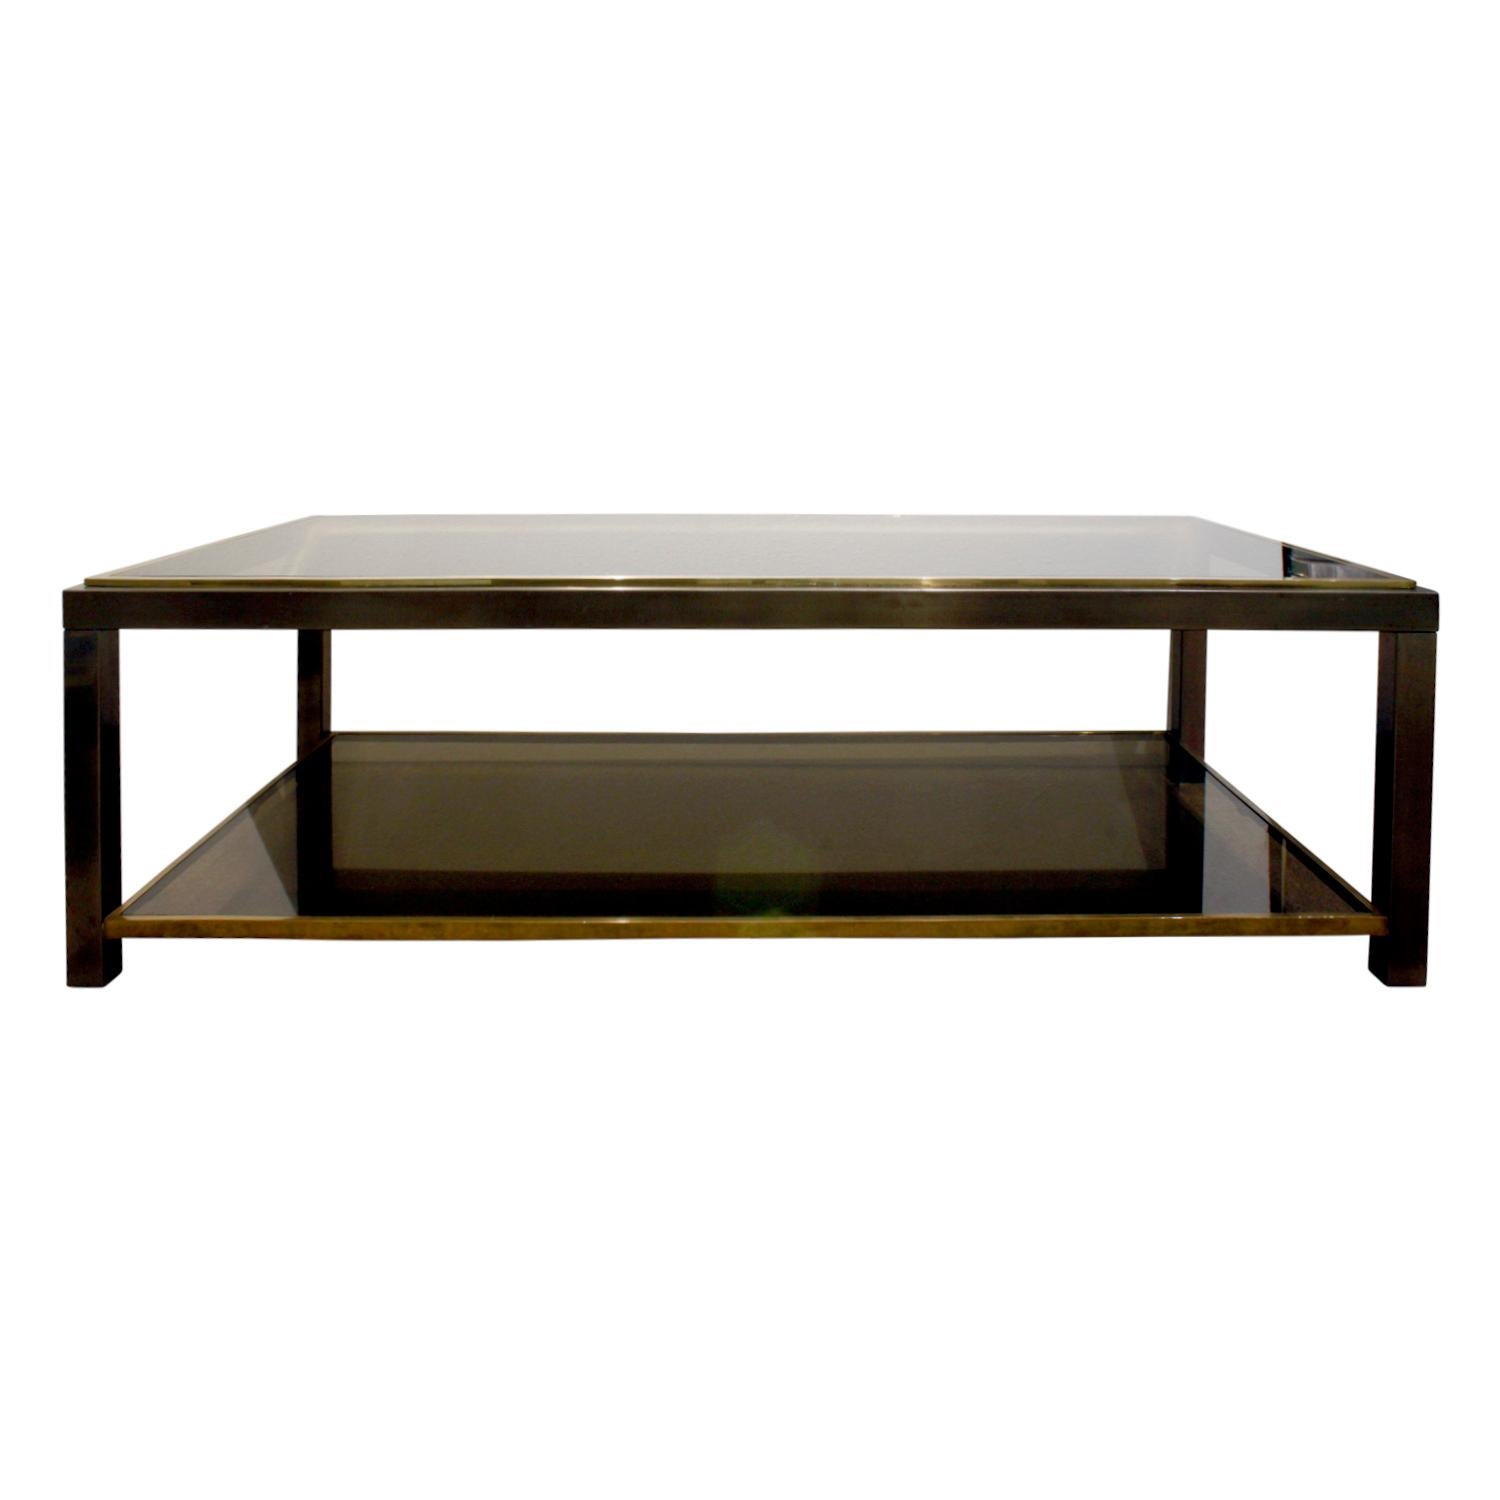 2-tier coffee table in gunmetal and brass with inset bronze glass by Willy Rizzo, Italian, 1960s.